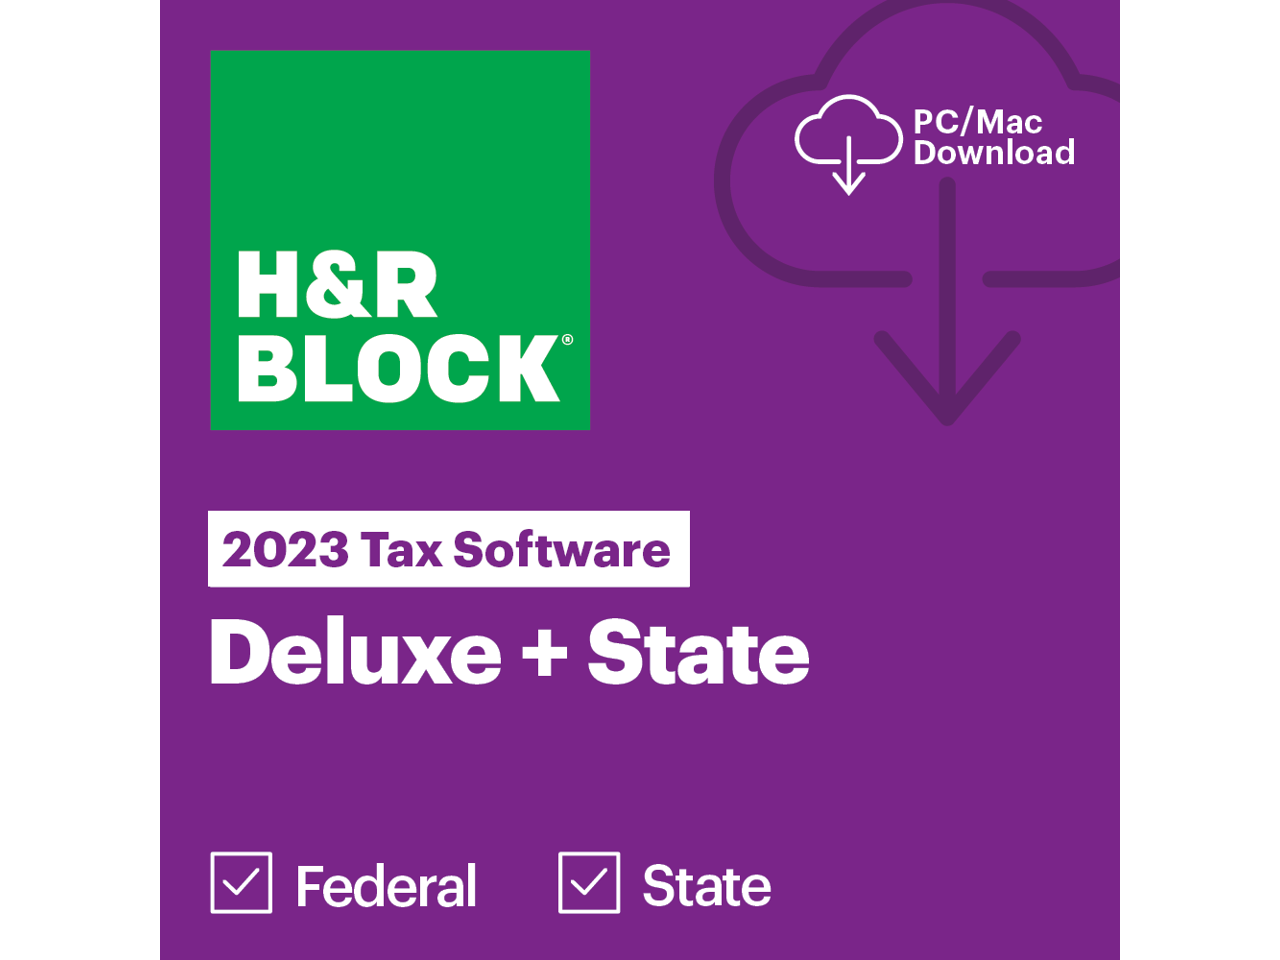 H&R Block Federal & State Tax Software Download - $25 off